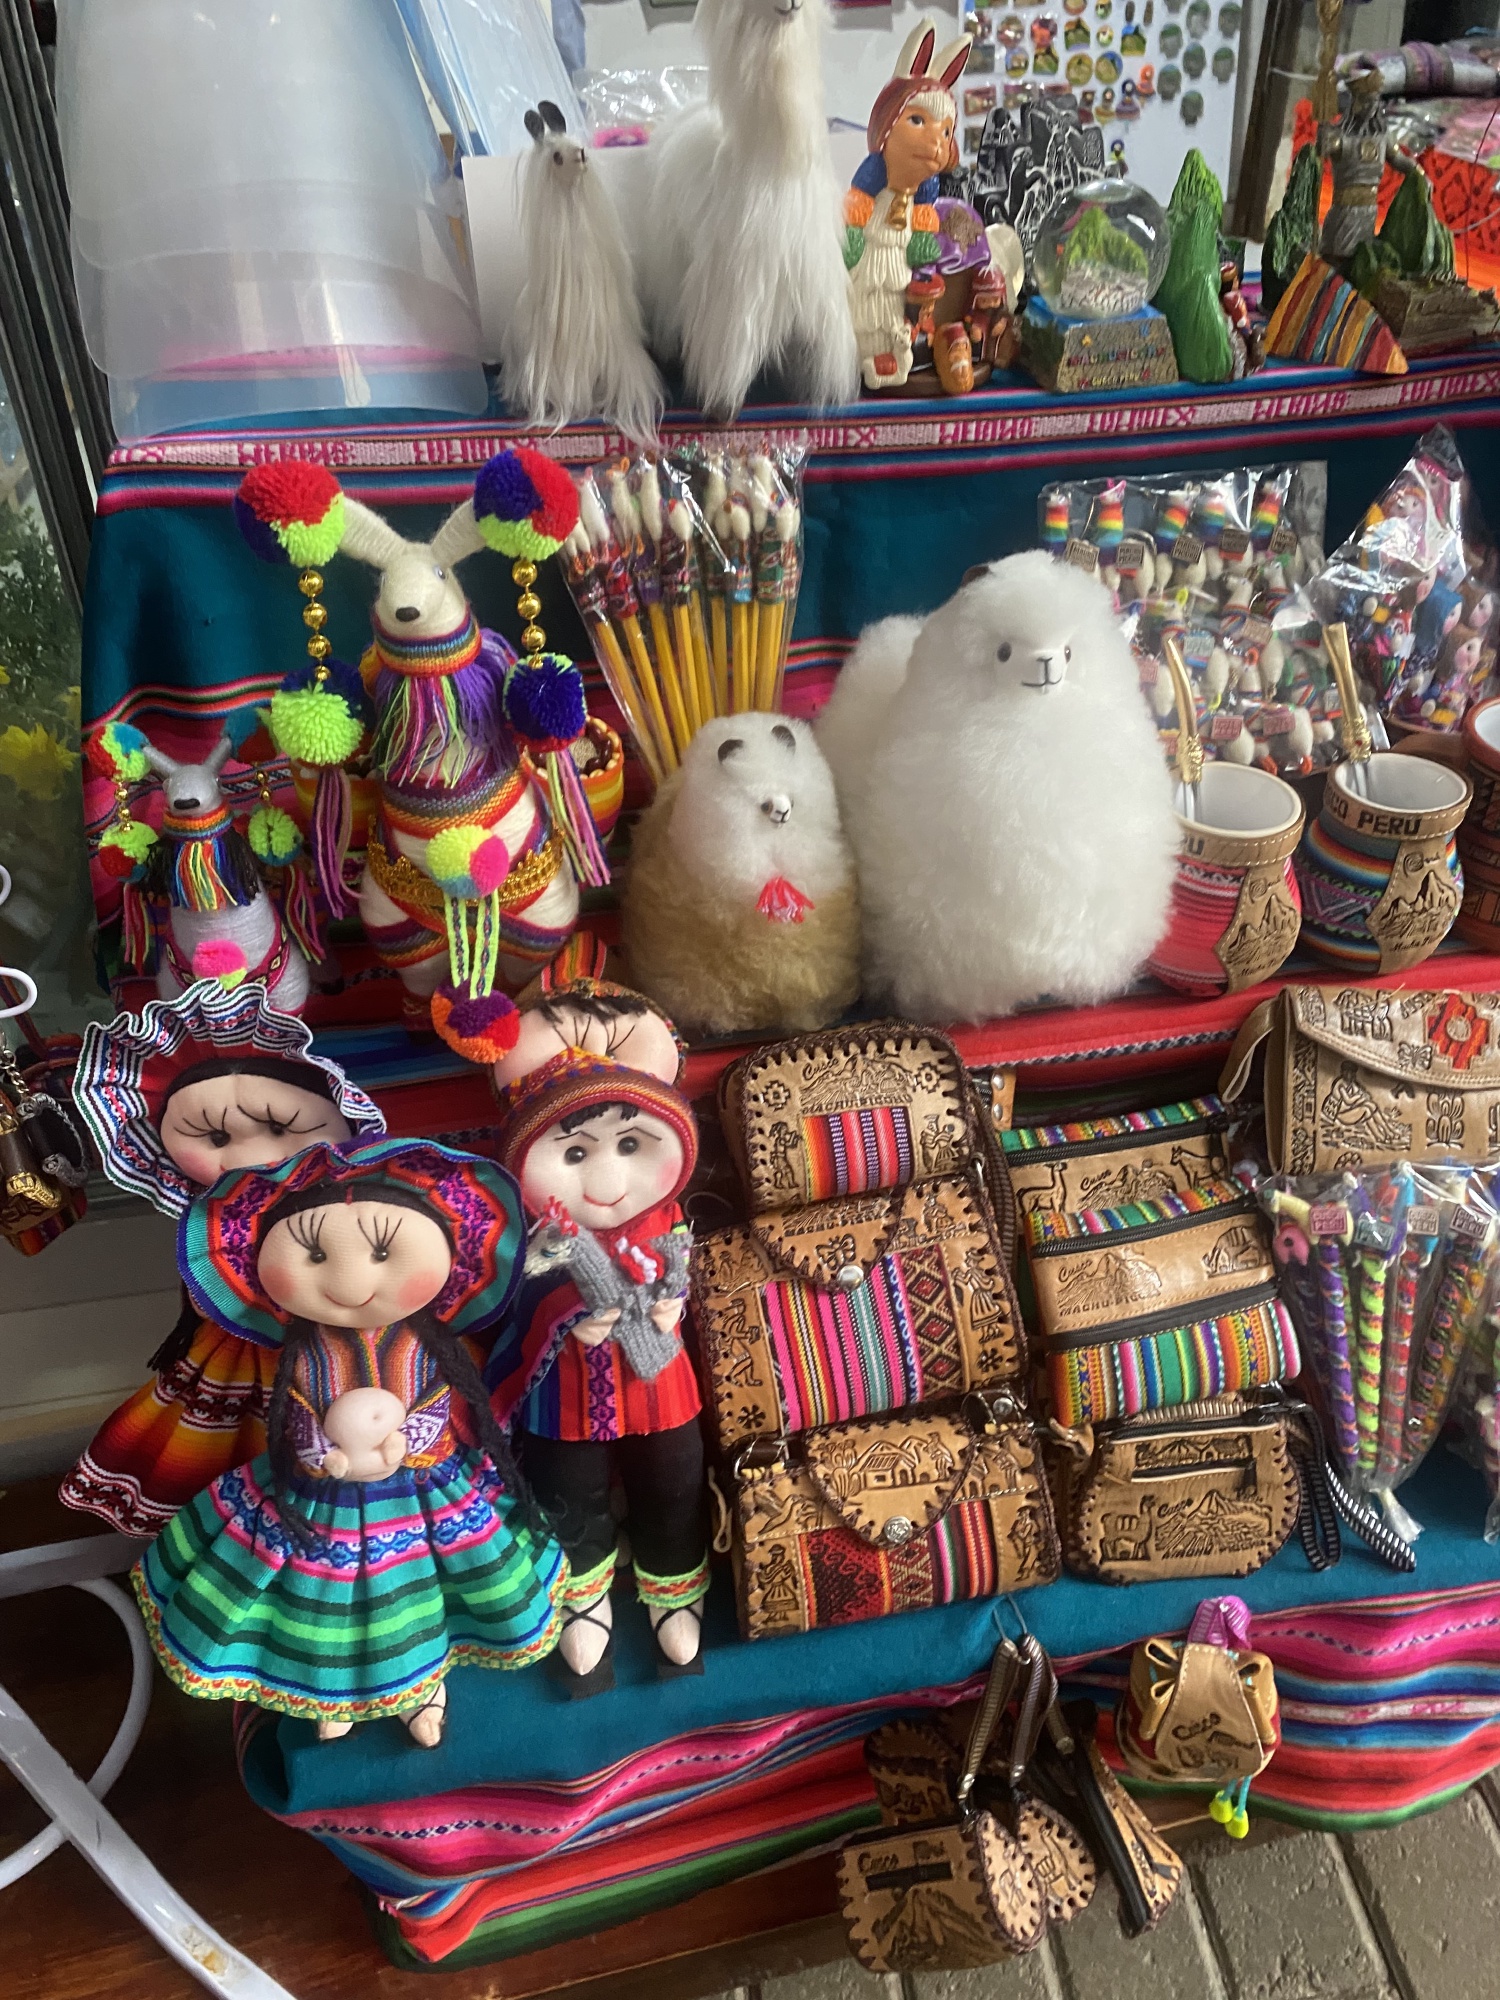 On our way back to the train station, there is a market full of cute goodies...